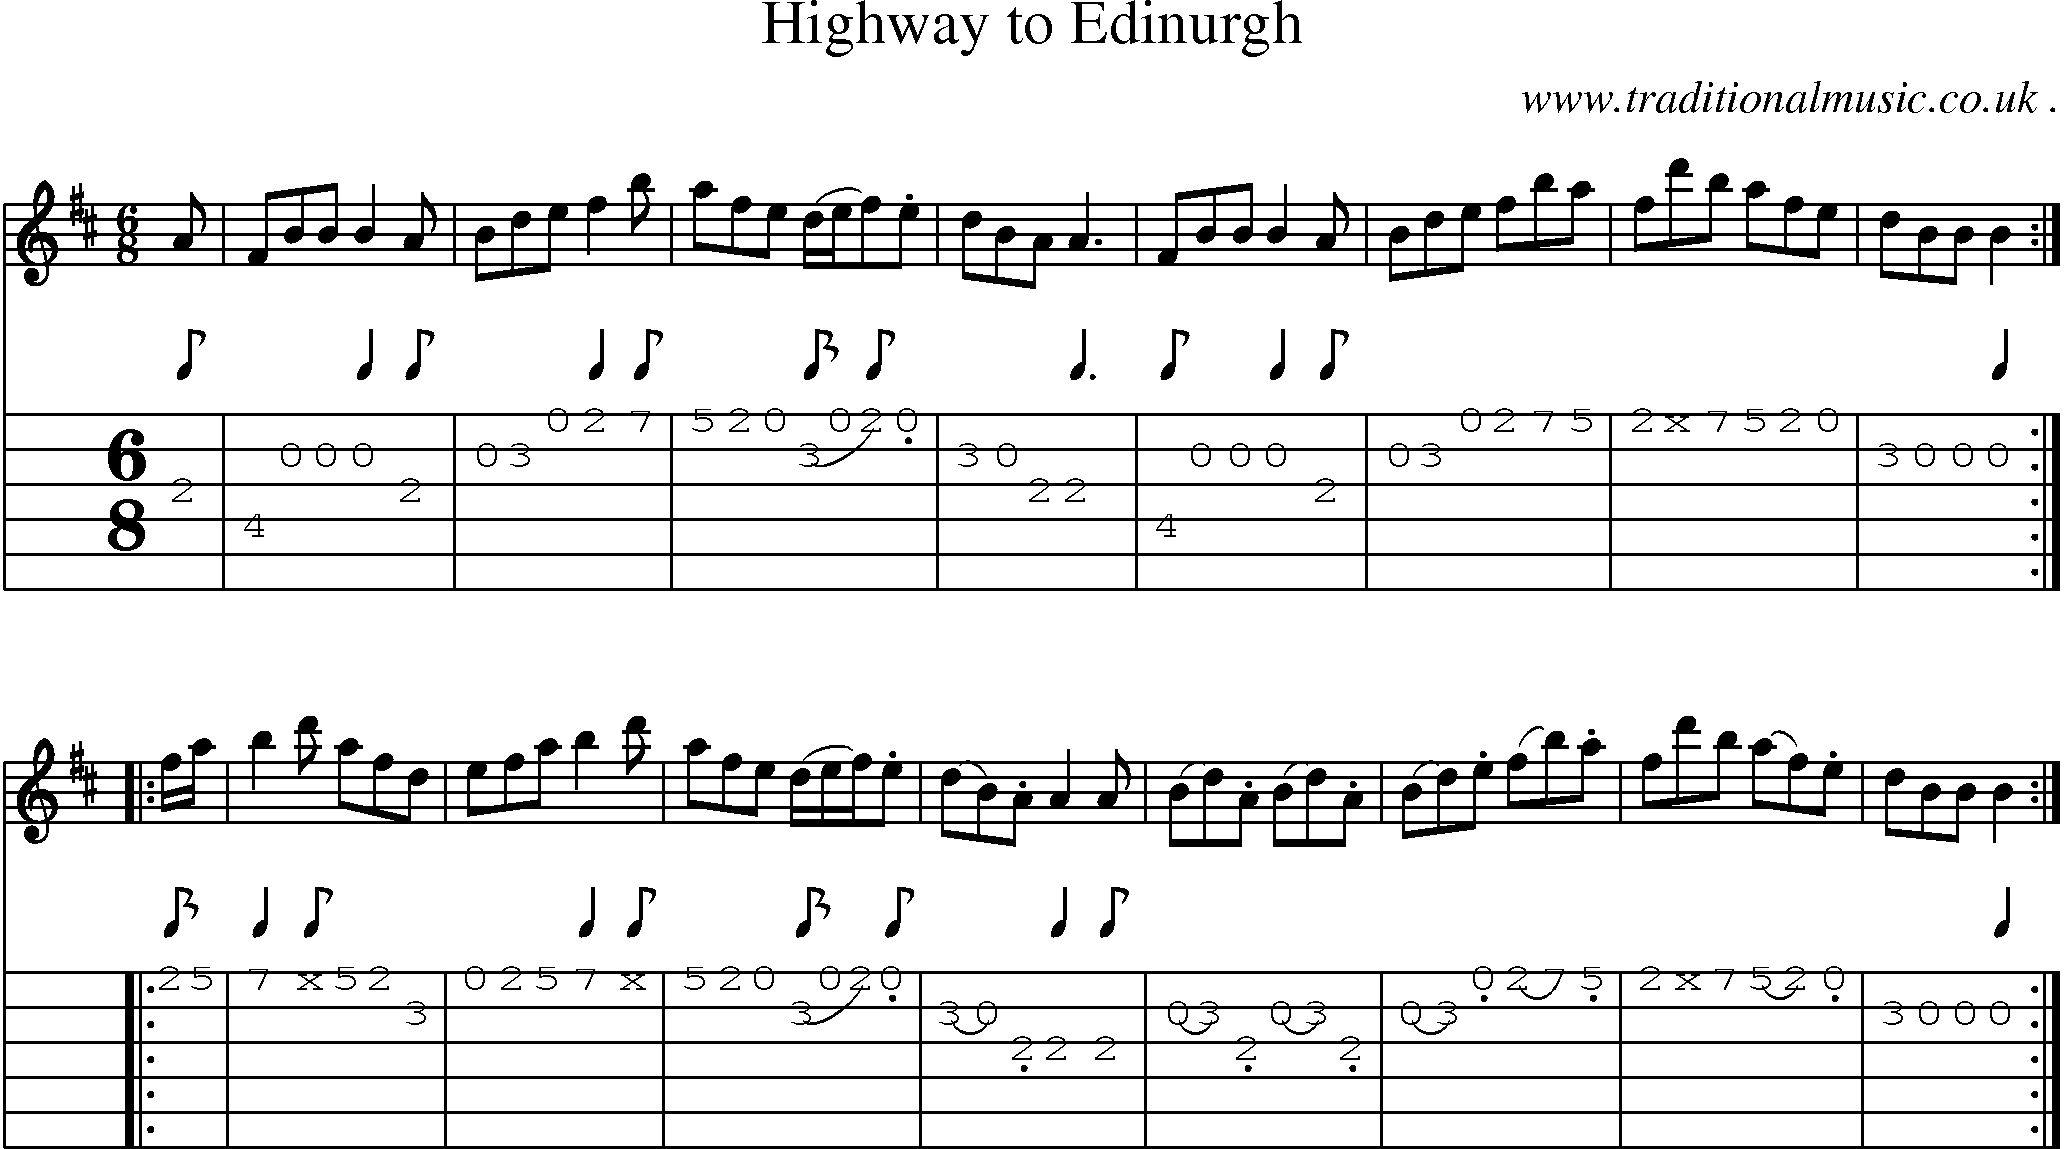 Sheet-music  score, Chords and Guitar Tabs for Highway To Edinurgh